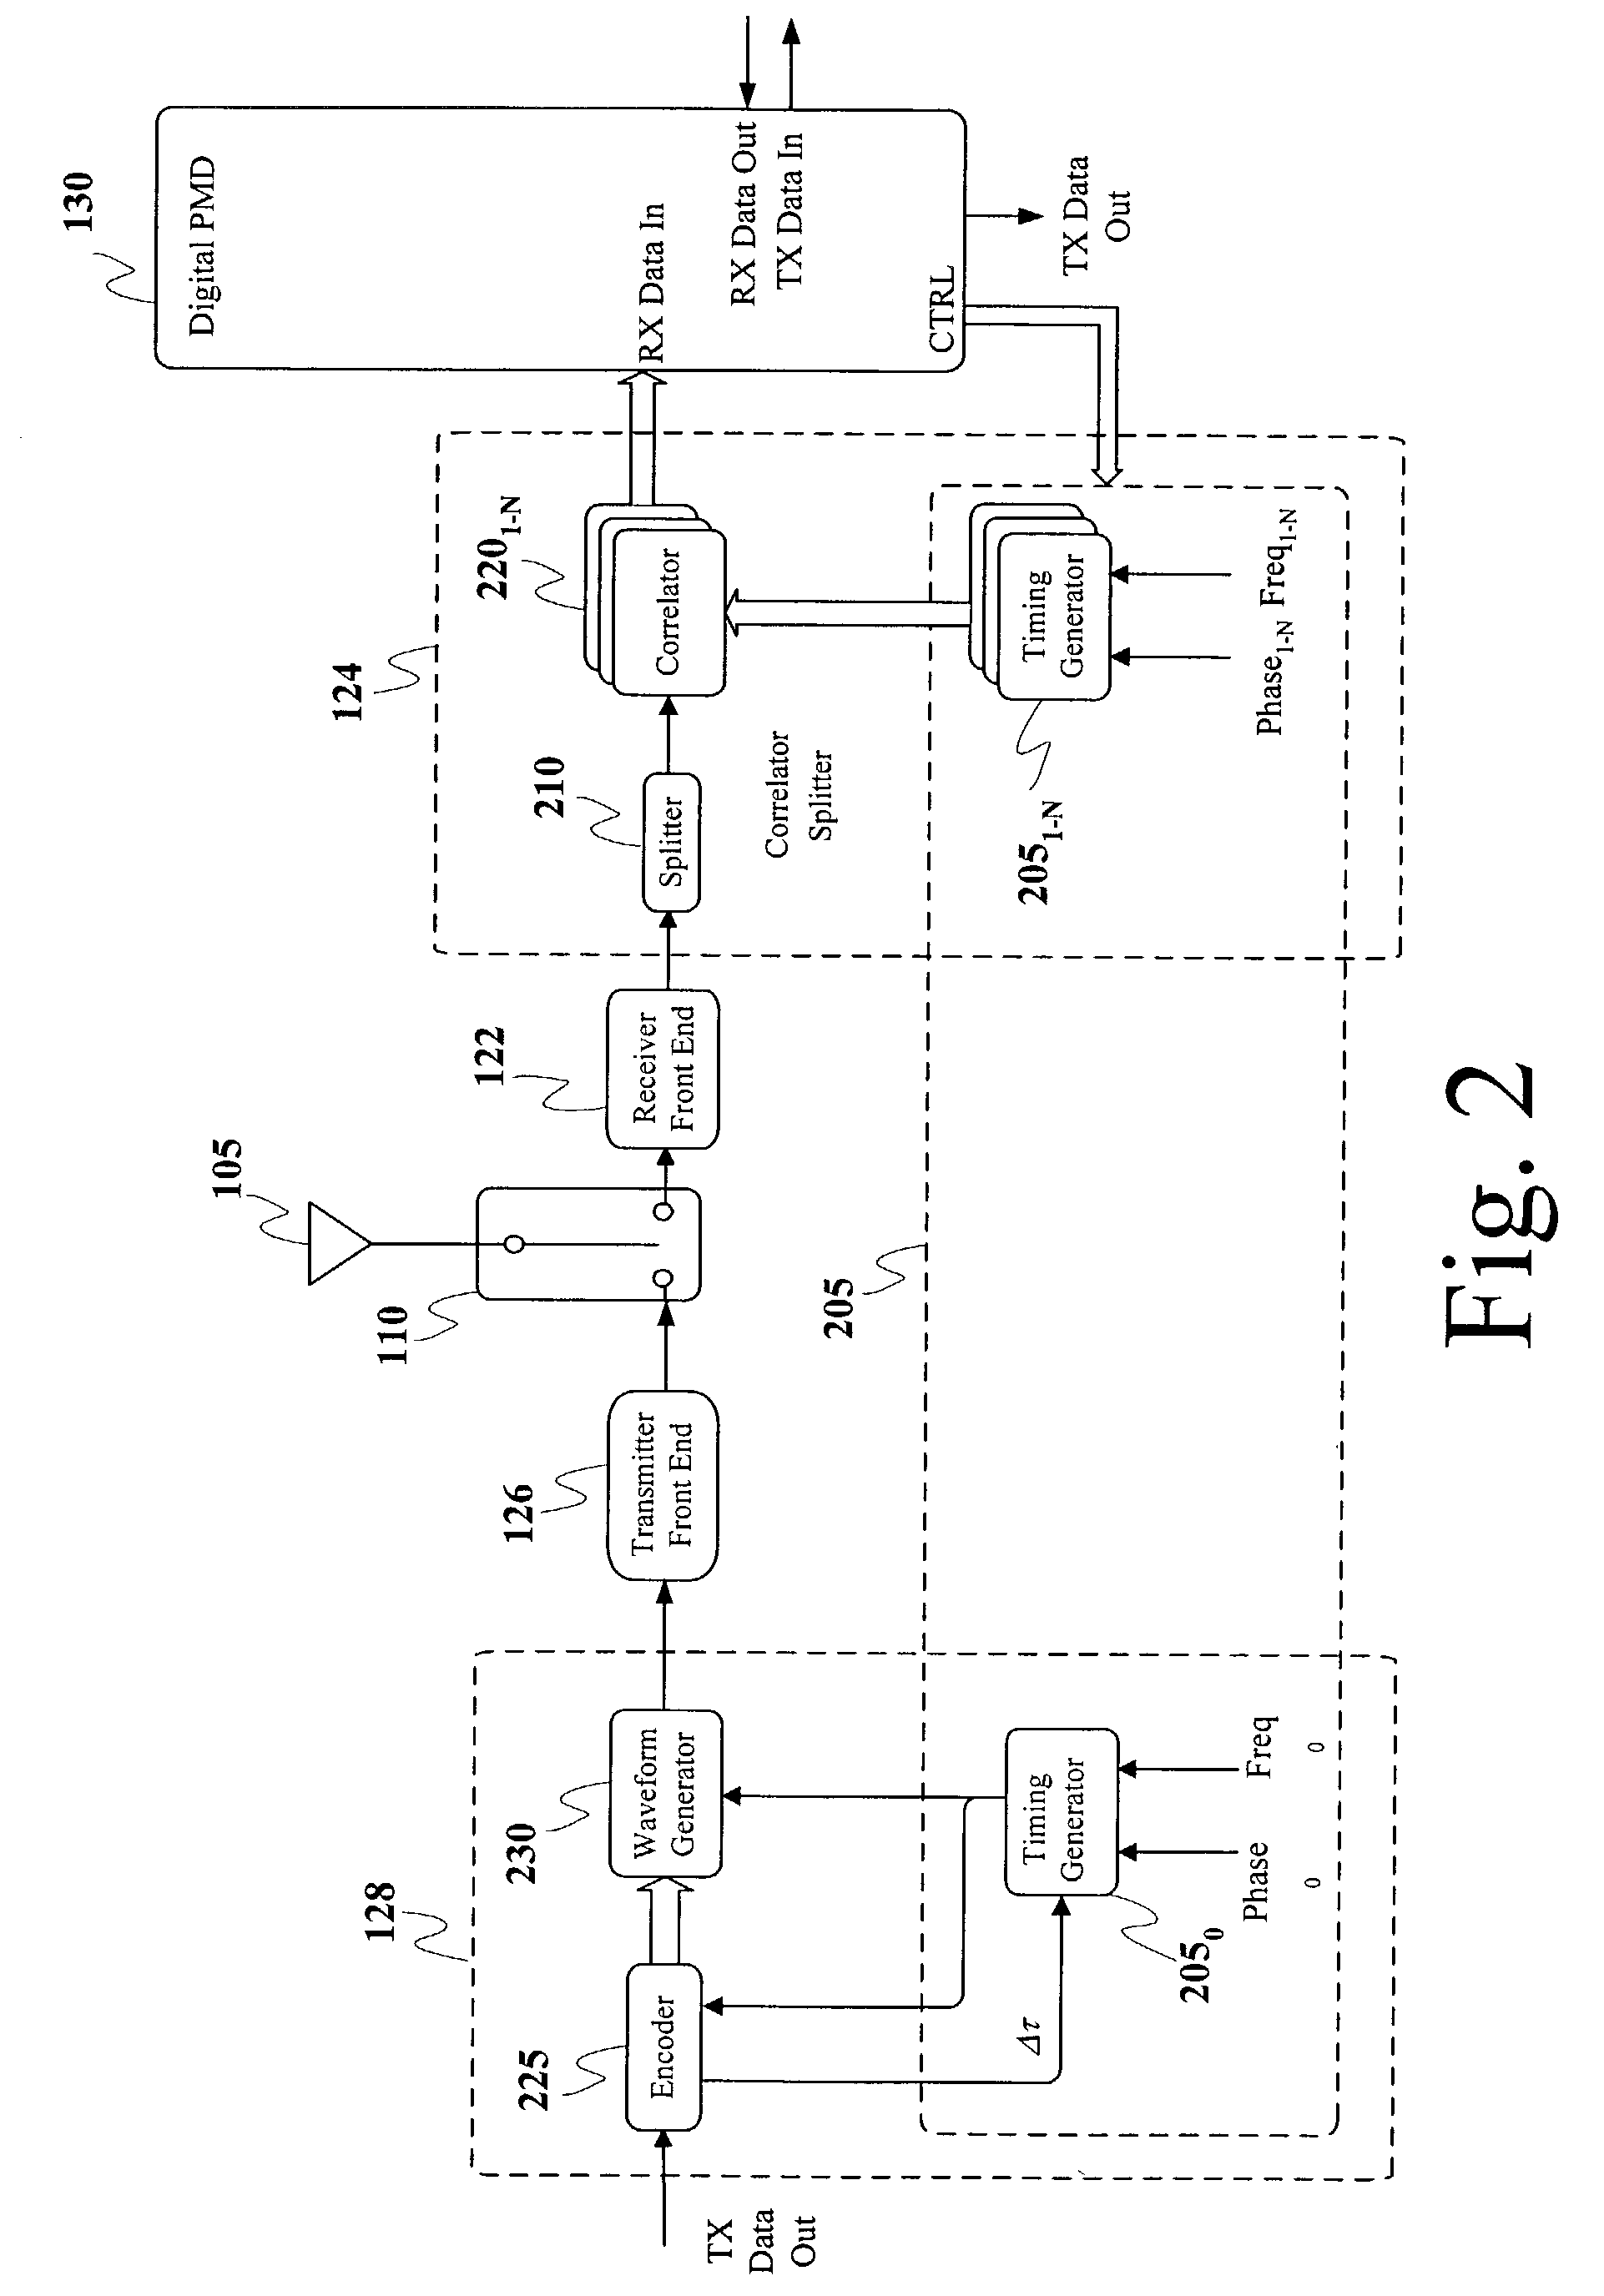 Method and system for performing distance measuring and direction finding using ultrawide bandwidth transmissions